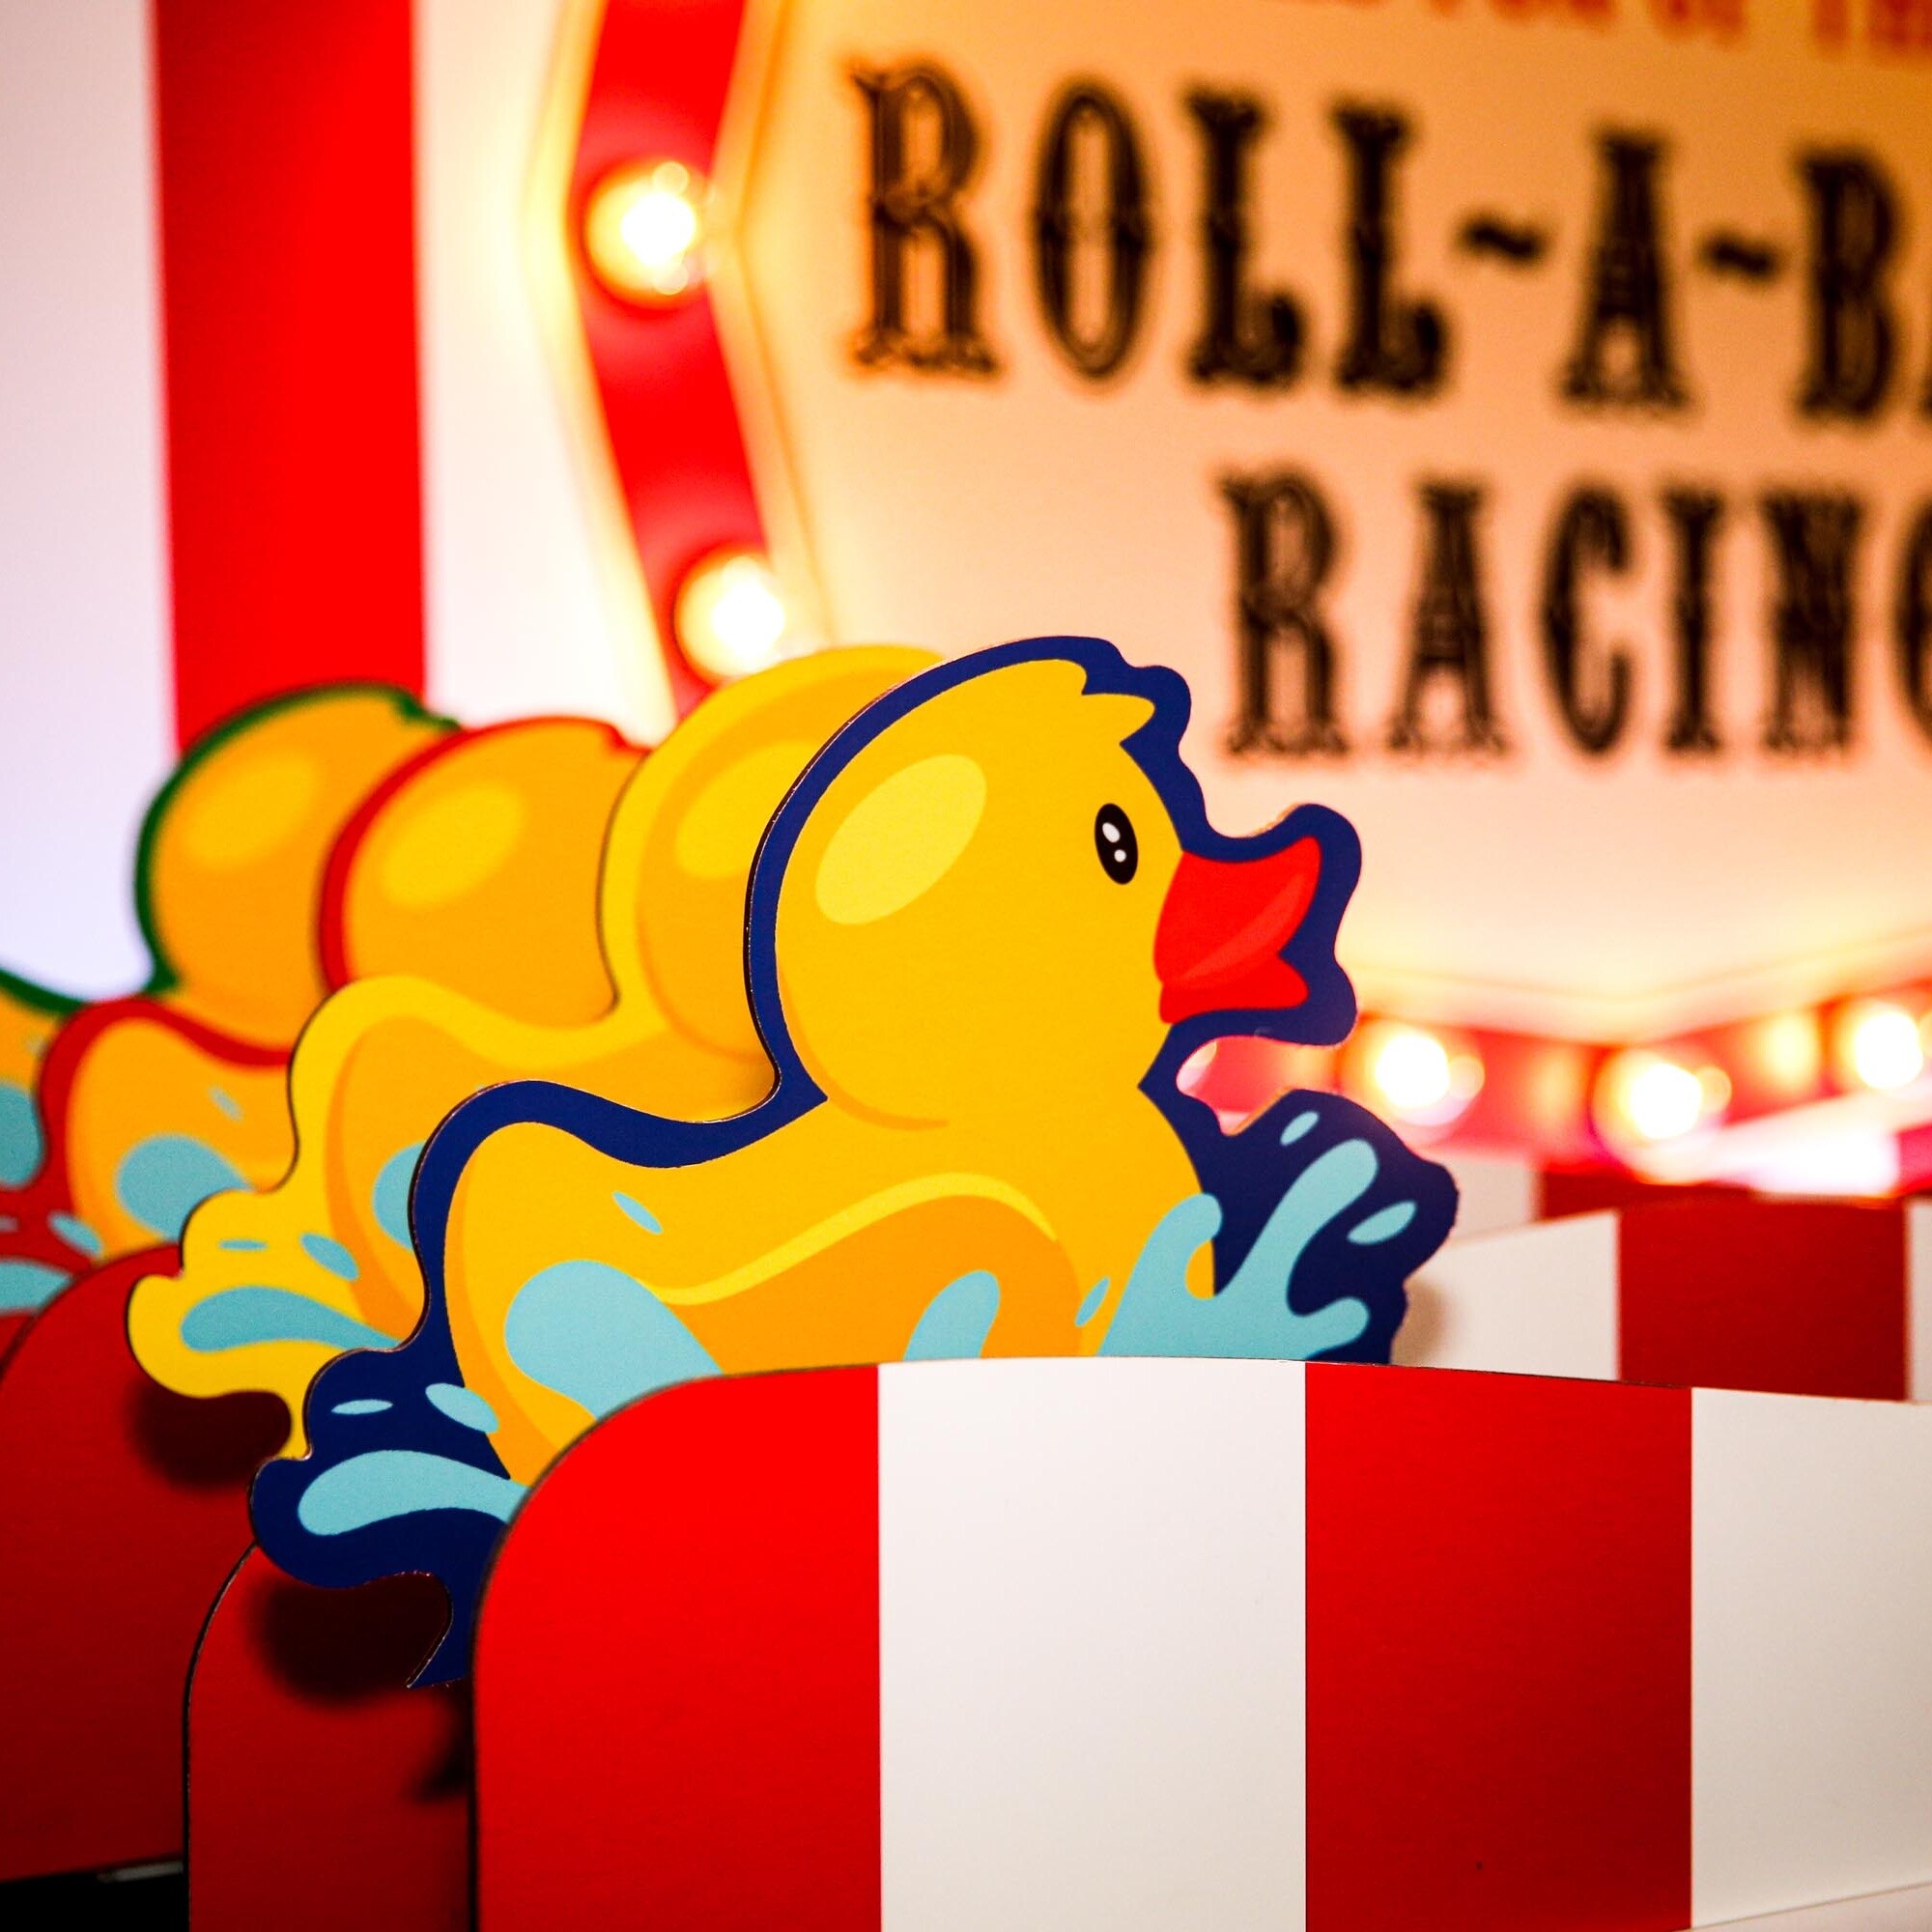 Roll a Ball Racing Fairground Game Duck Characters